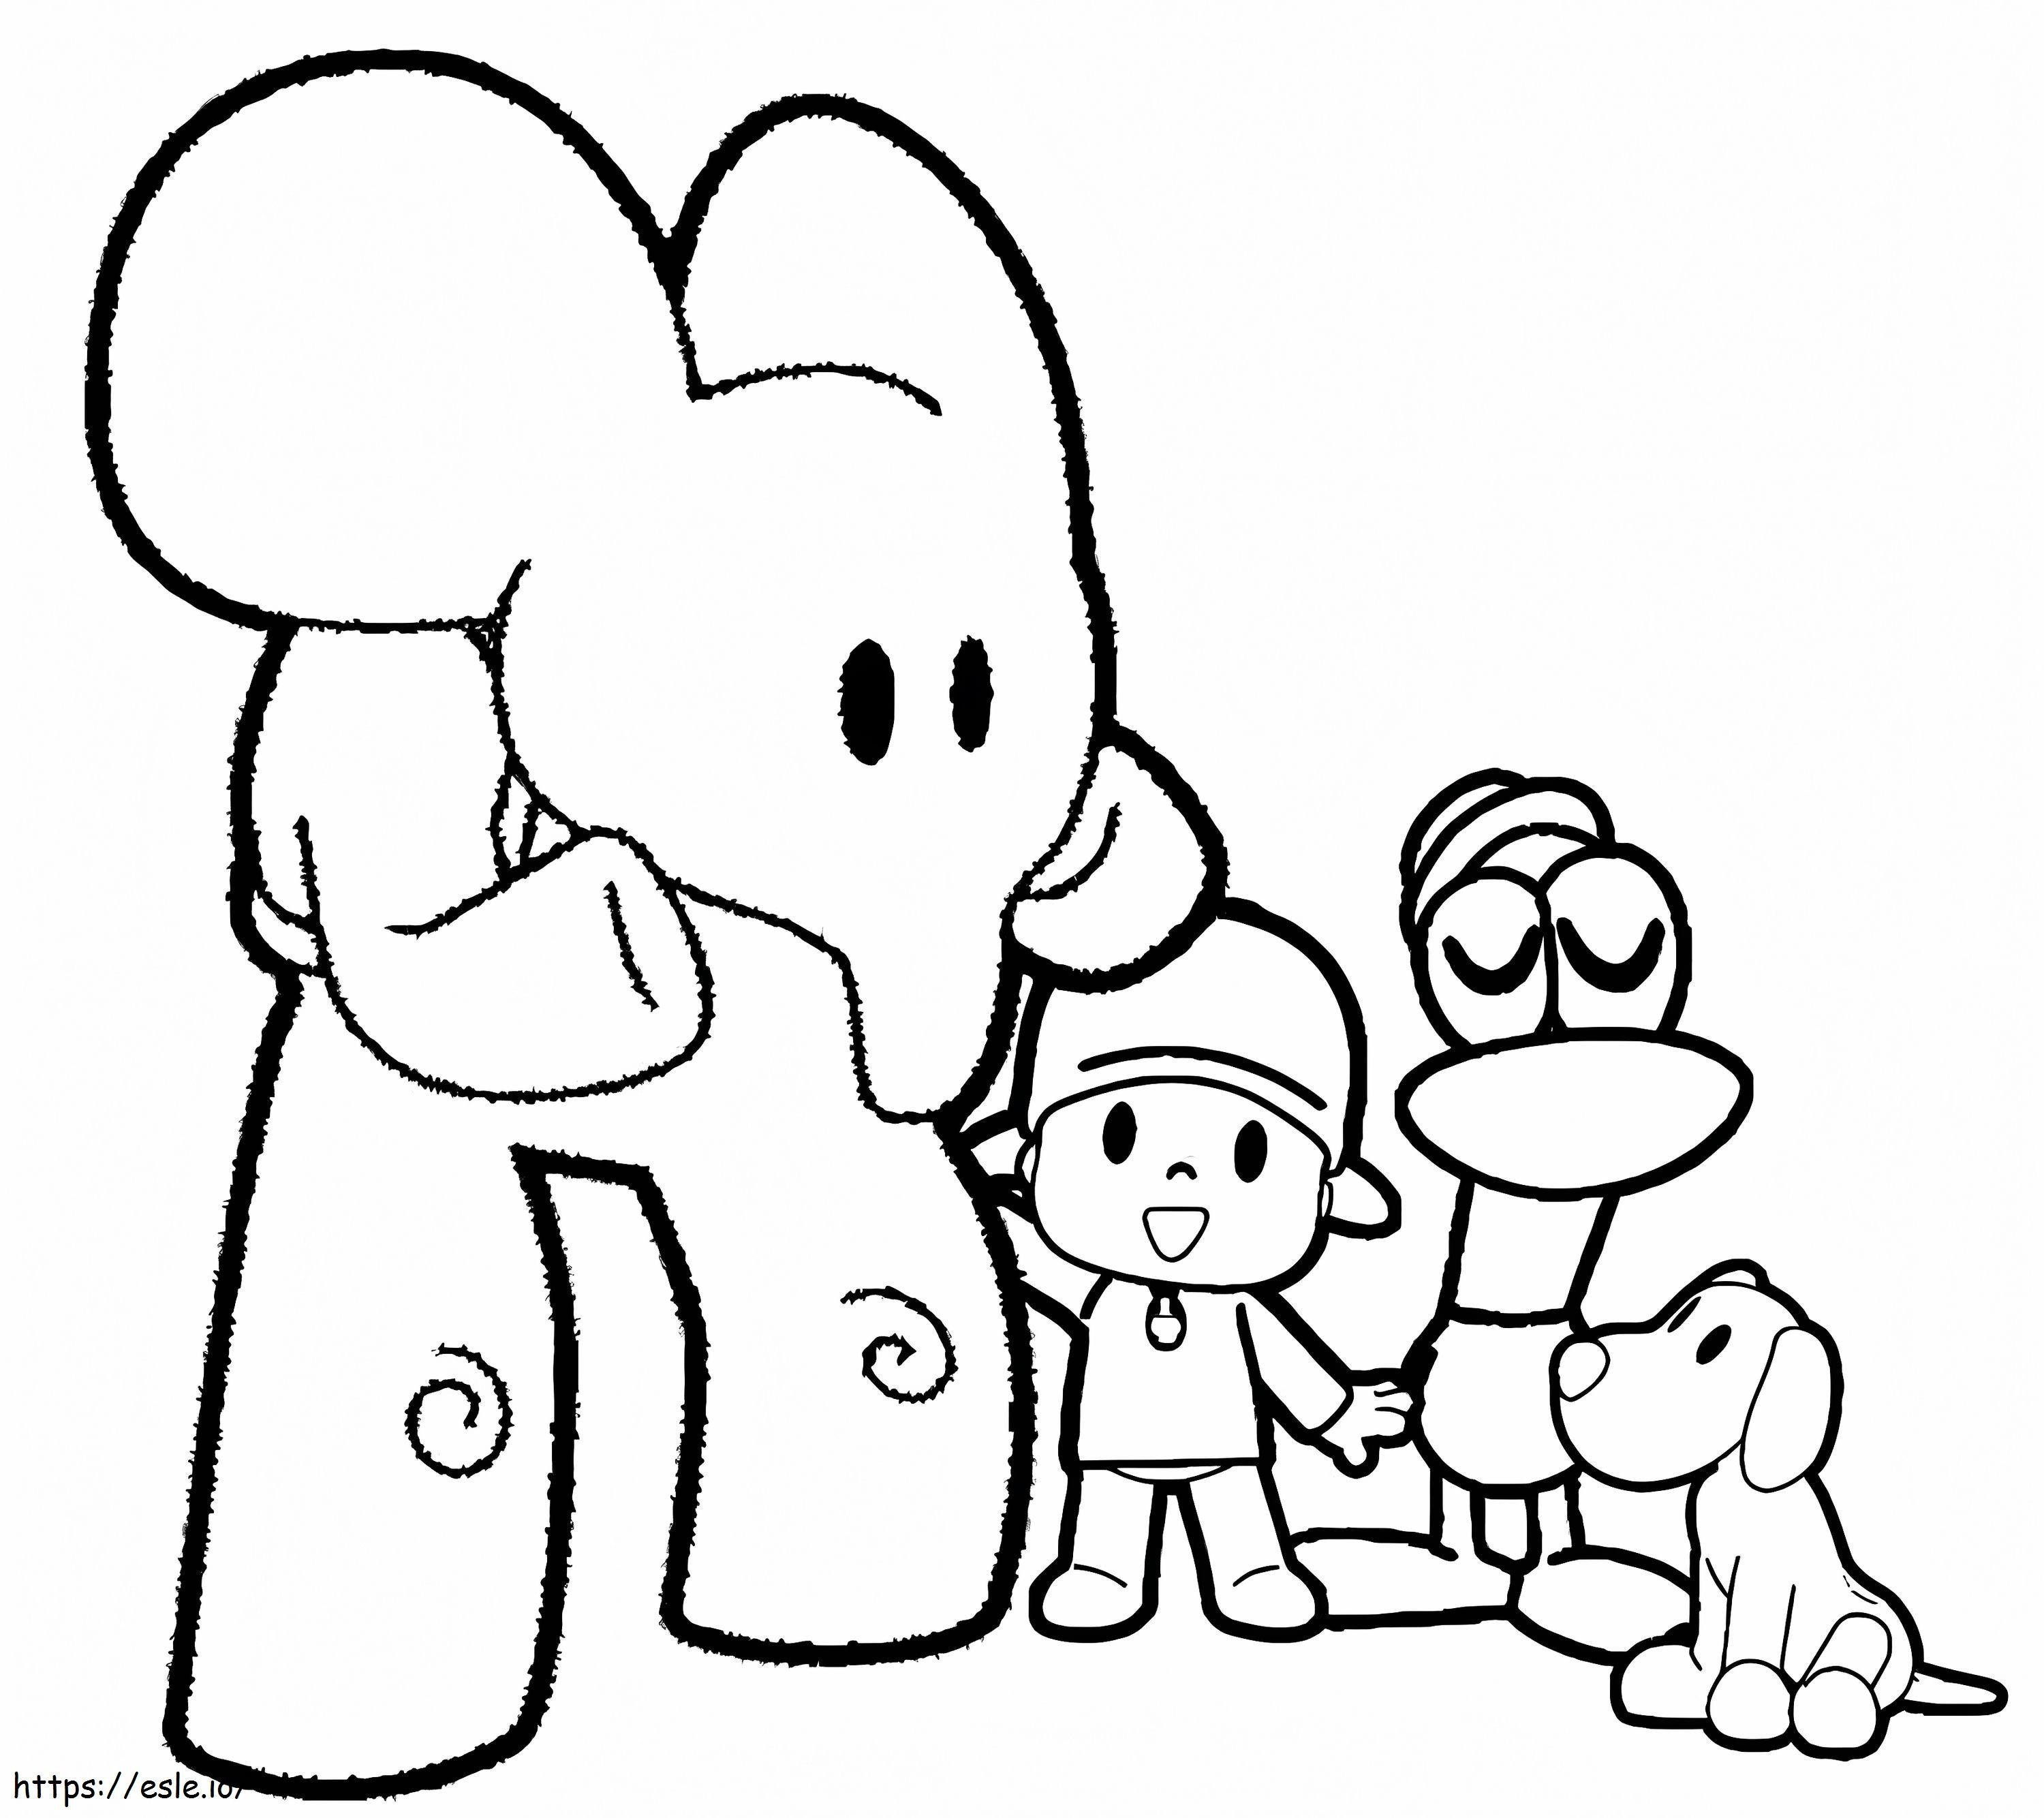 Pocoyo And His Funny Friends coloring page